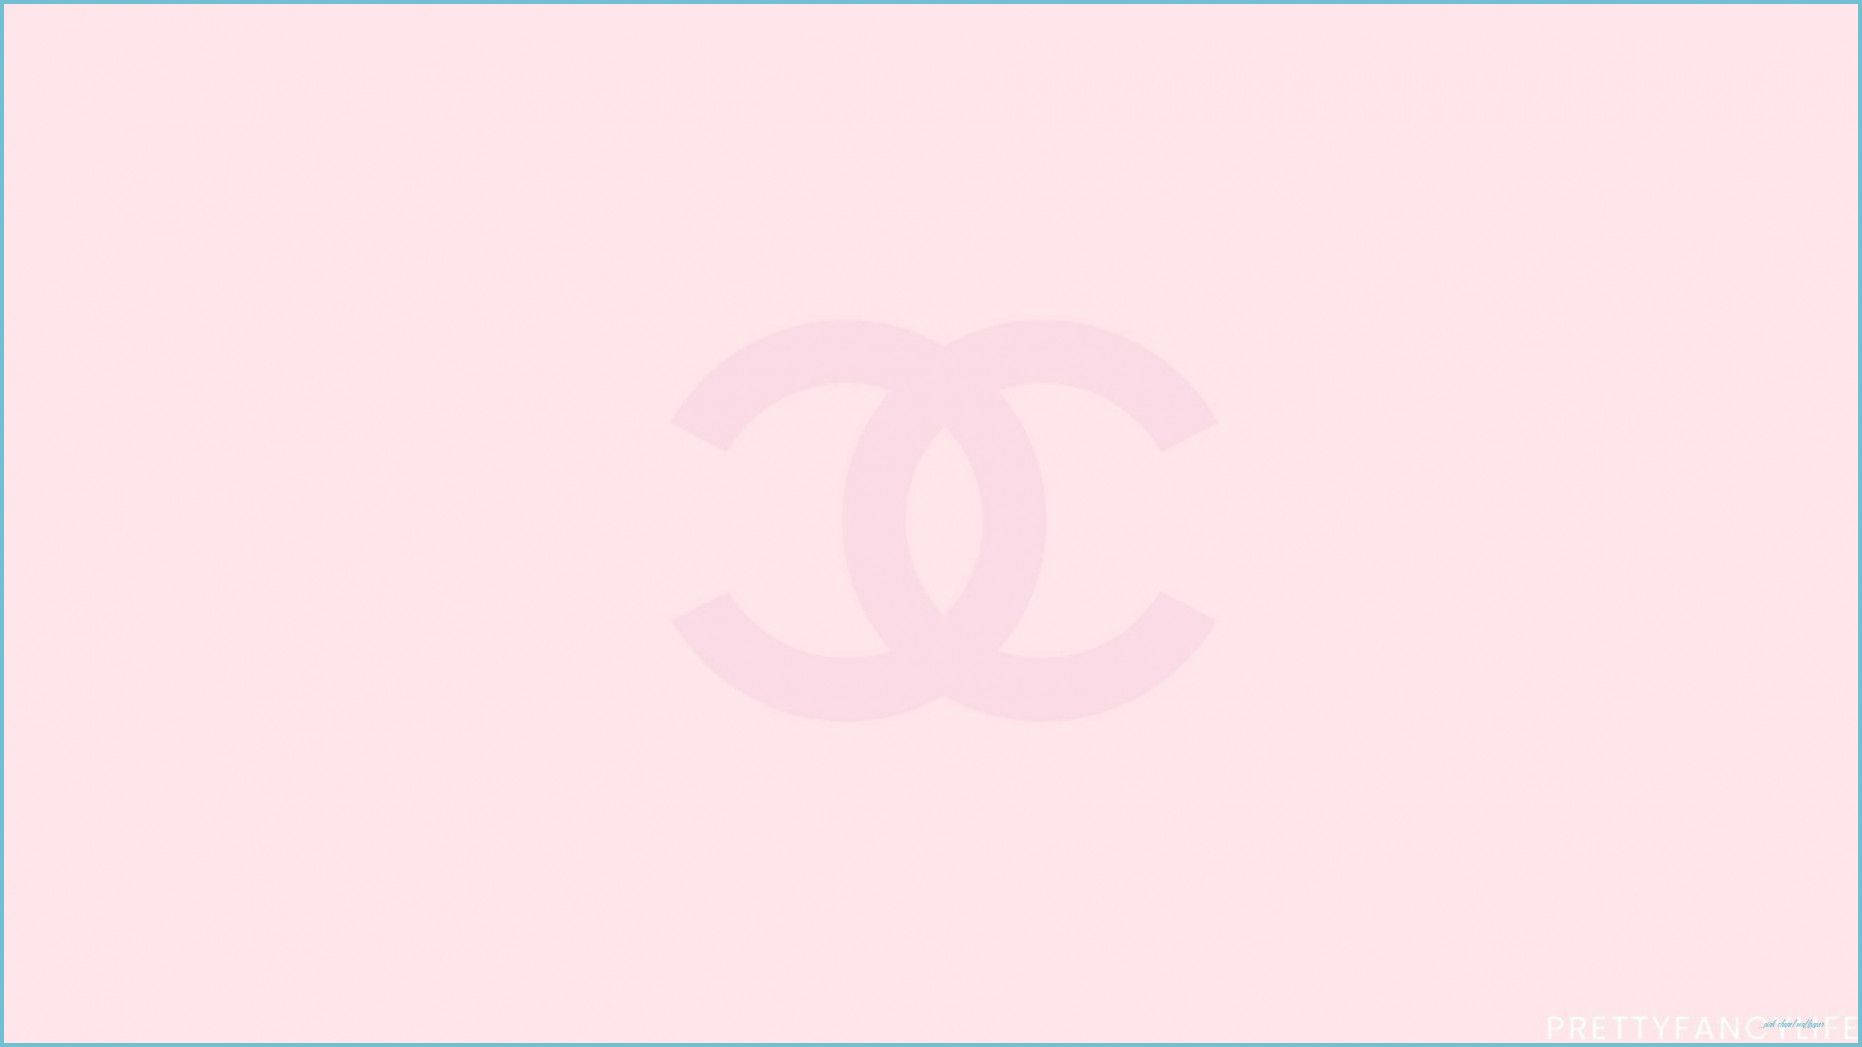 Download Silhouette Of Pink Chanel Logo Wallpaper